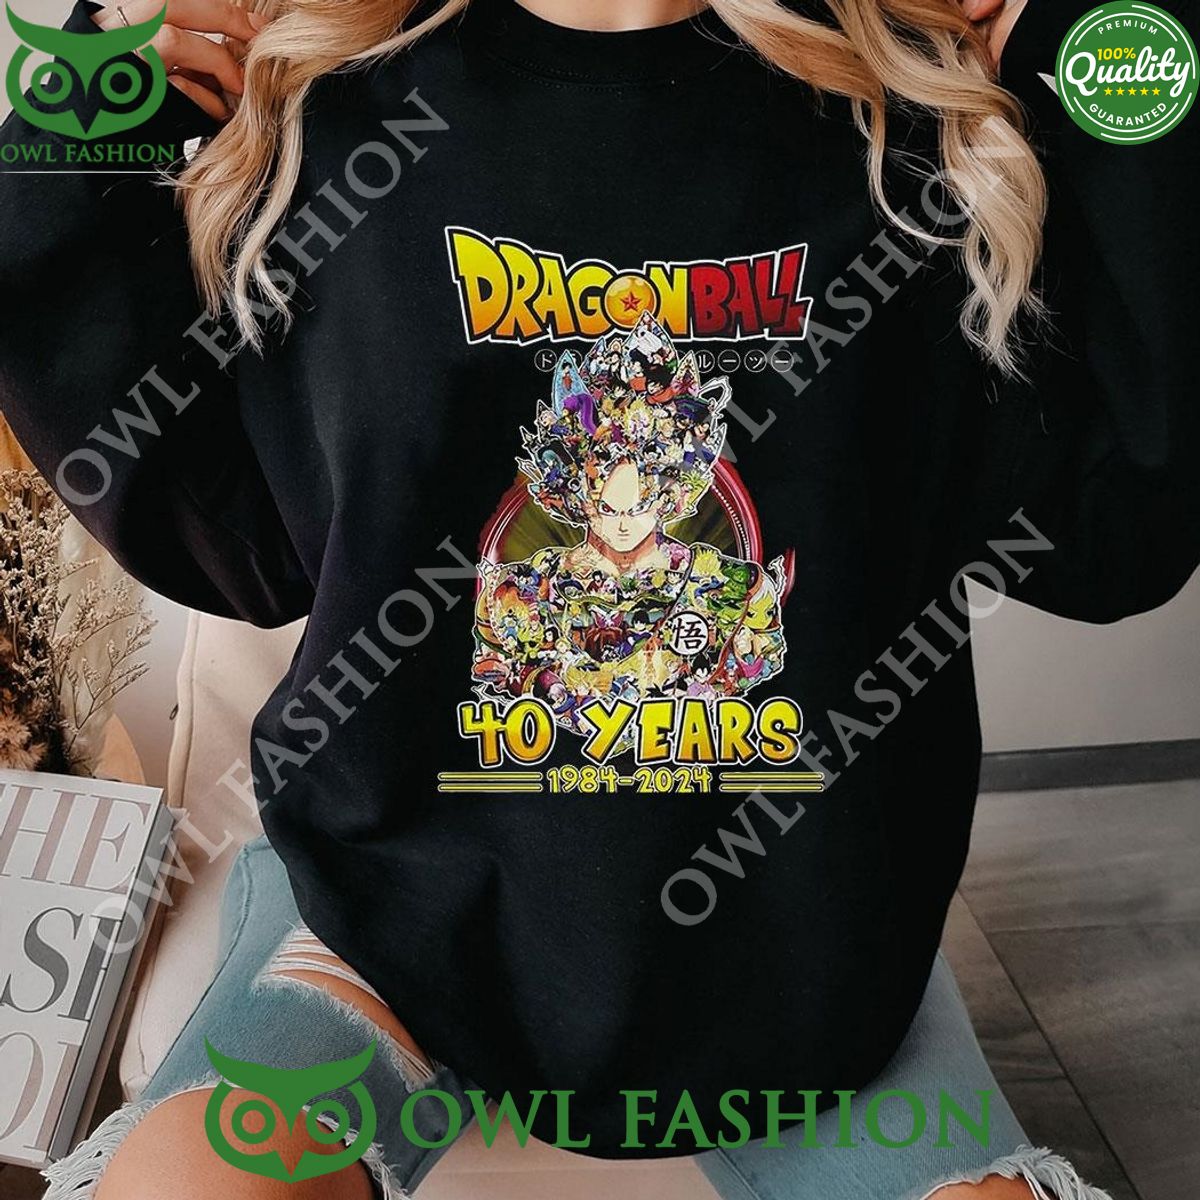 Dragon Ball 40 Years Of 1984 – 2024 Thank You For The Memories Tshirt Hoodie